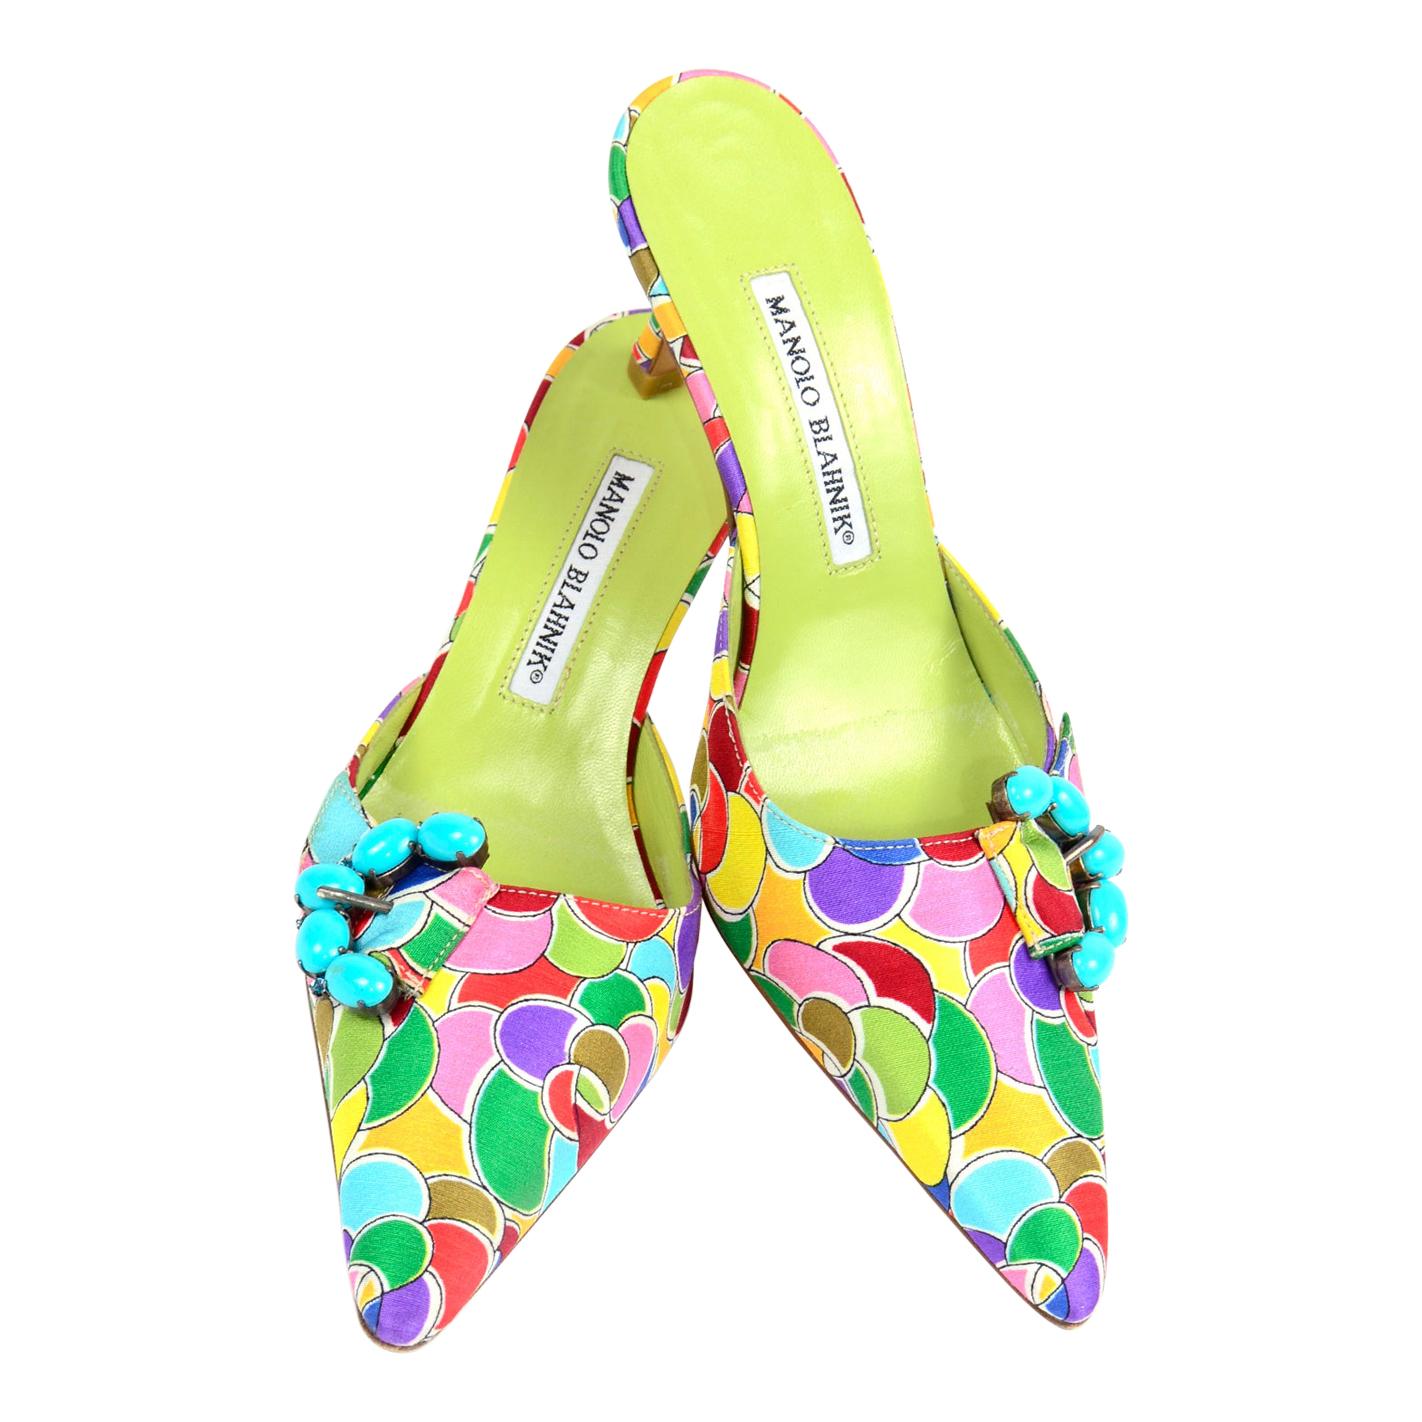 Manolo Blahnik Atomica Colorful Heeled Mules w/ Turquoise Buckle Size 36 1/2